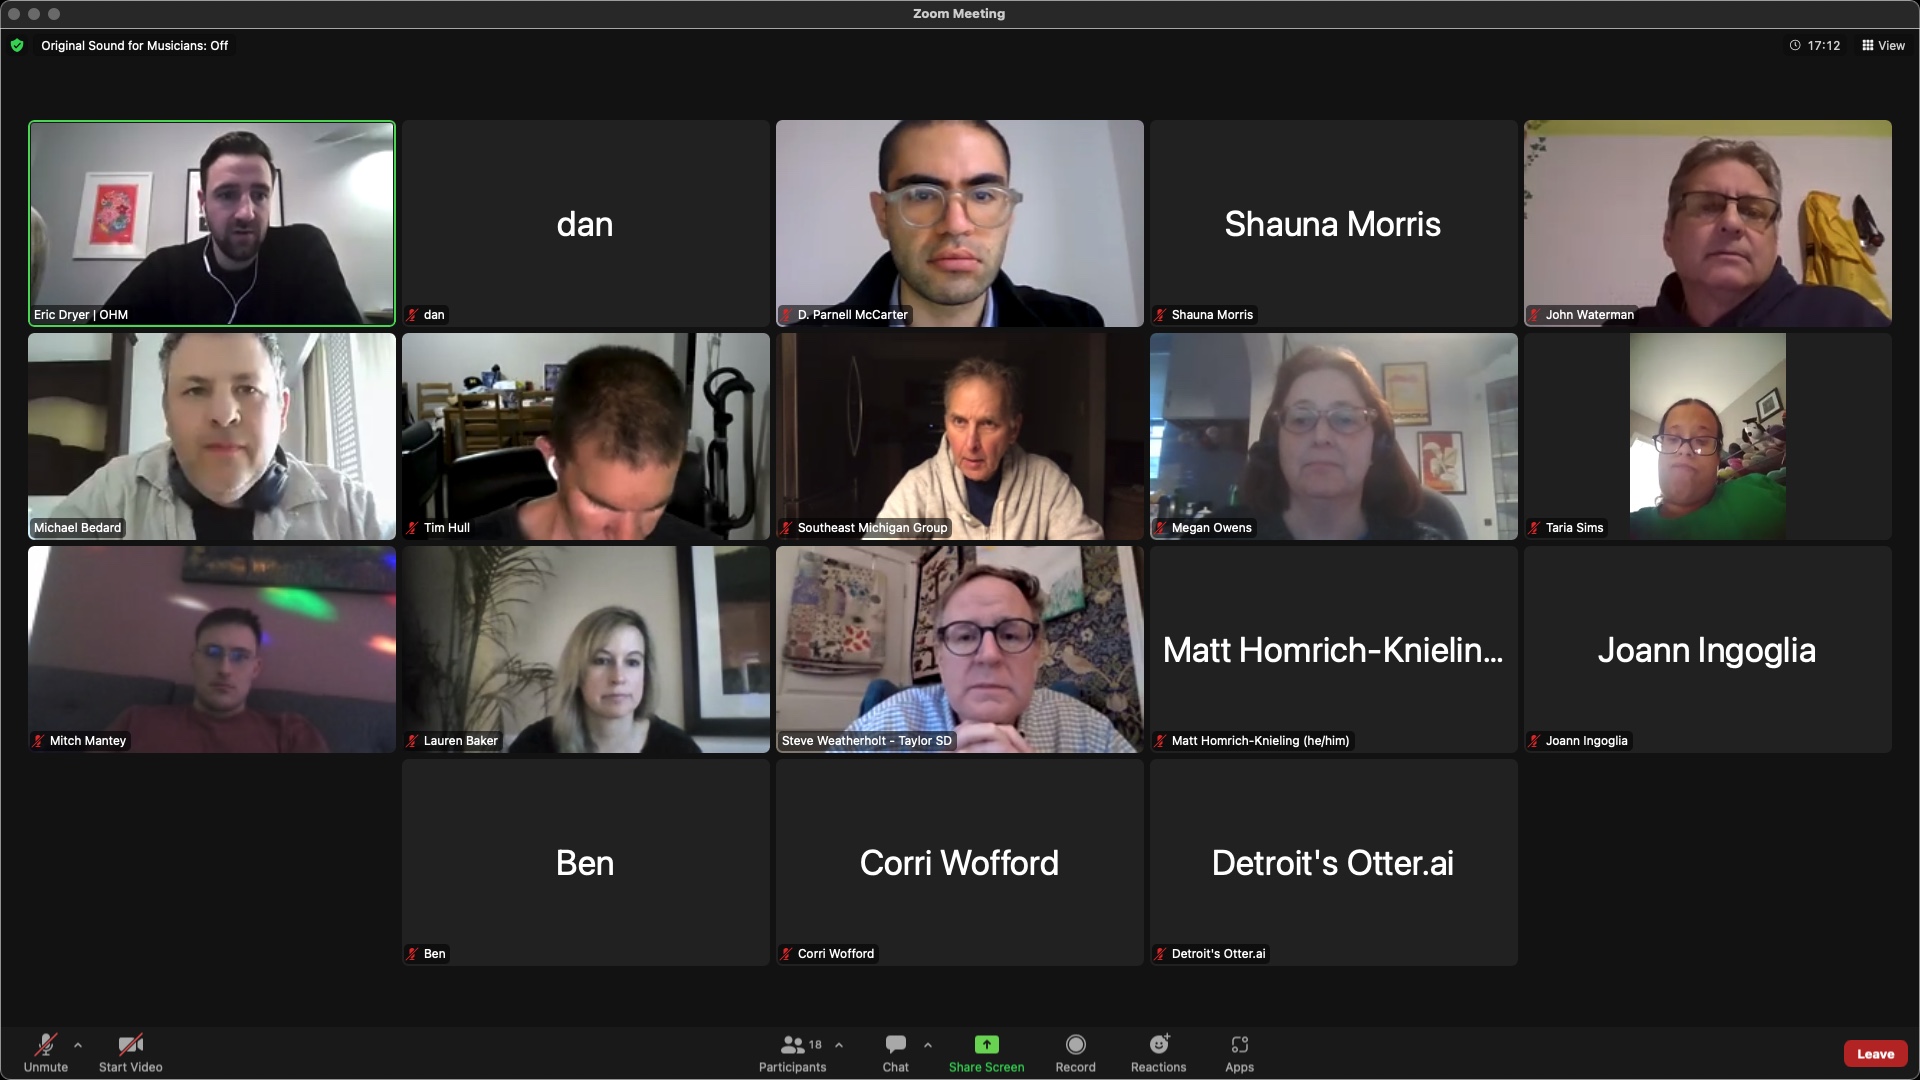 Online meeting application displaying 18 participants, some of whom have video feeds. Eric Dryer (pale skin, black hair, earphones, black shirt) is speaking. Others present are dan, D. Parnell McCarter (pale skin, black hair, glasses, grey shirt), Shauna Morris, John Waterman (pale skin, grey hair, glasses, black sweater), Michael Bedard (pale skin, grey hair, headphones, white shirt), Tim Hull (pale skin, black hair, earphones, black shirt), Southeast Michigan Group (pale skin, grey hair, black shirt, grey hoodie), Megan Owens (pale skin, black hair, glasses, black shirt), Taria Sims (darker skin, black hair, glasses, green shirt), Mitch Mantey (pale skin, black hair, glasses, red shirt), Lauren Baker (pale skin, white hair, black shirt), Steve Weatherholt (pale skin, grey hair, glasses, blue shirt), Matt Homrich-Knieling, Joann Ingoglia, Ben, Corri Wofford and Detroit’s Otter.ai. 